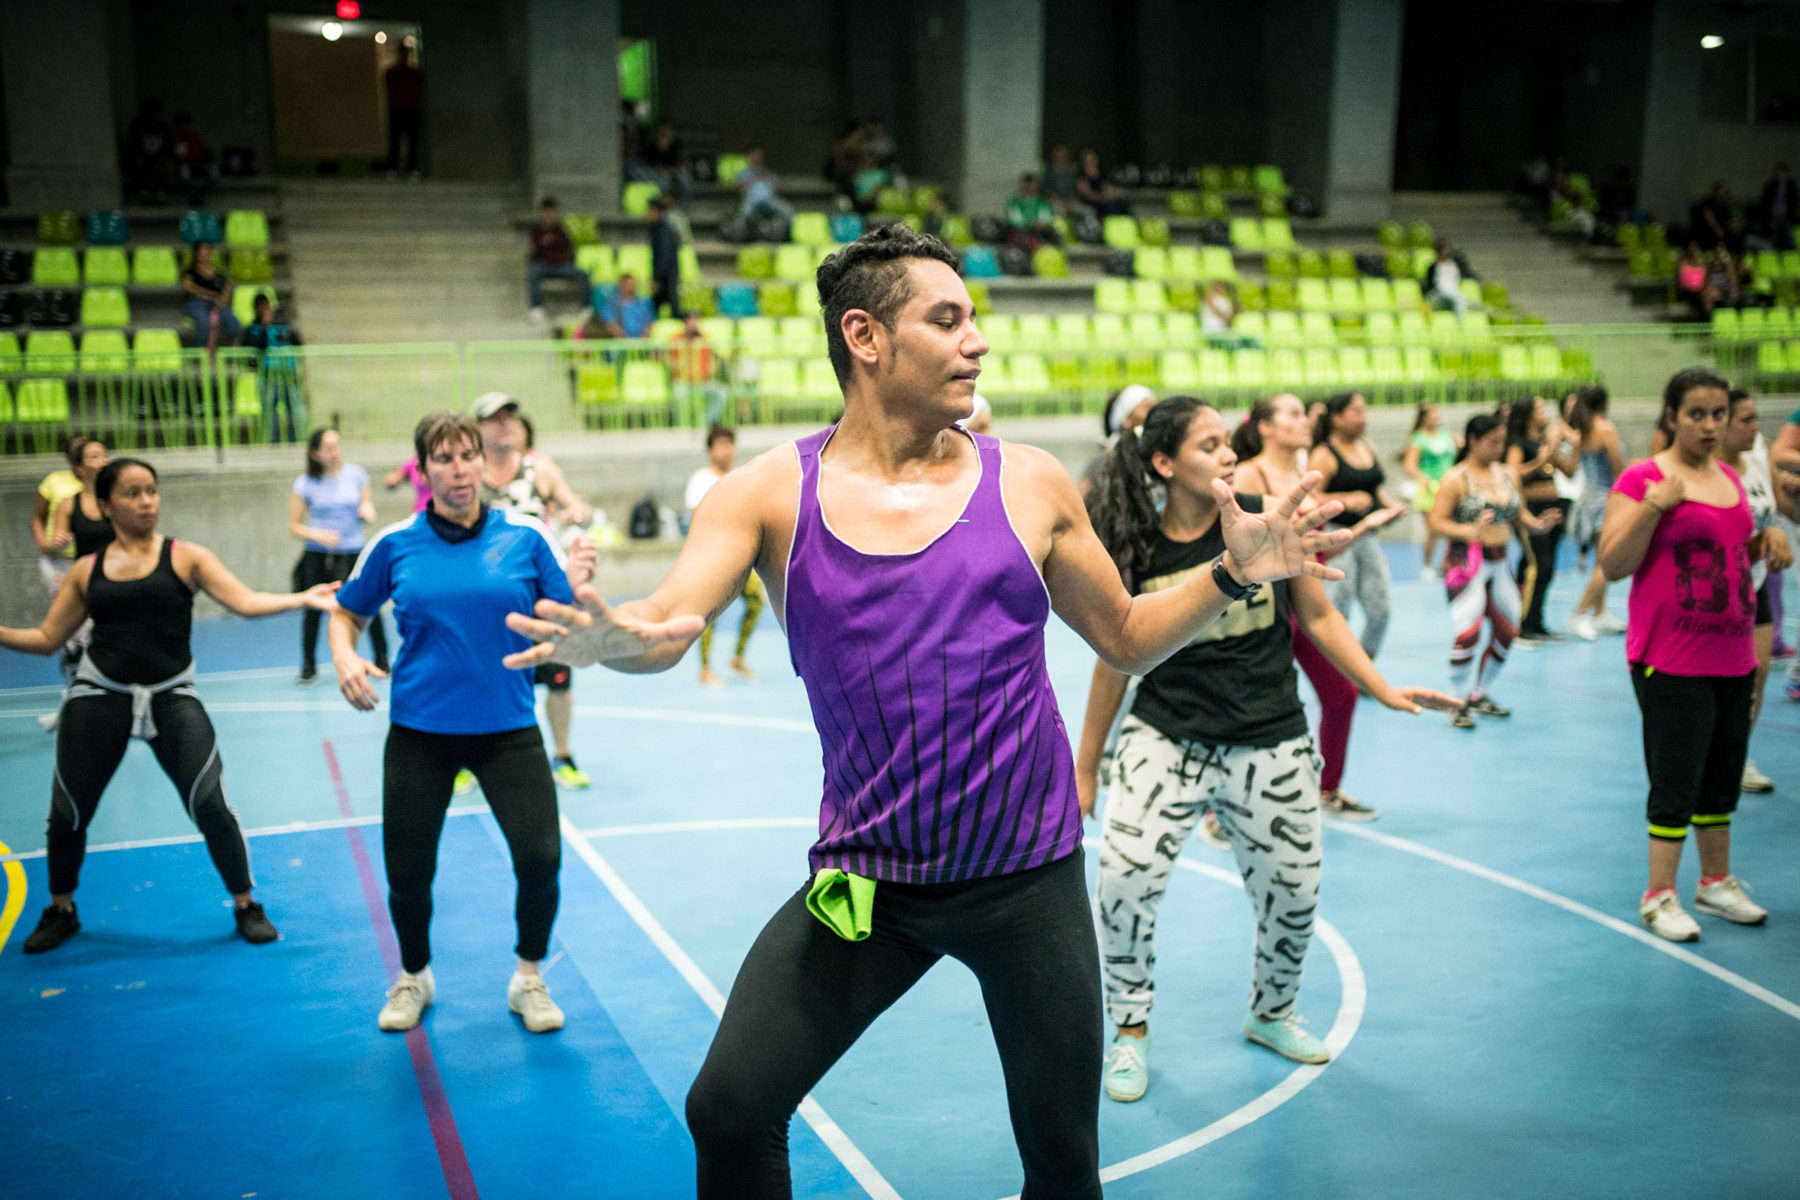 Alejandro used to teach dance and aerobics. Now he works as a freelance dancer. Aerobics is pure relaxation for him.